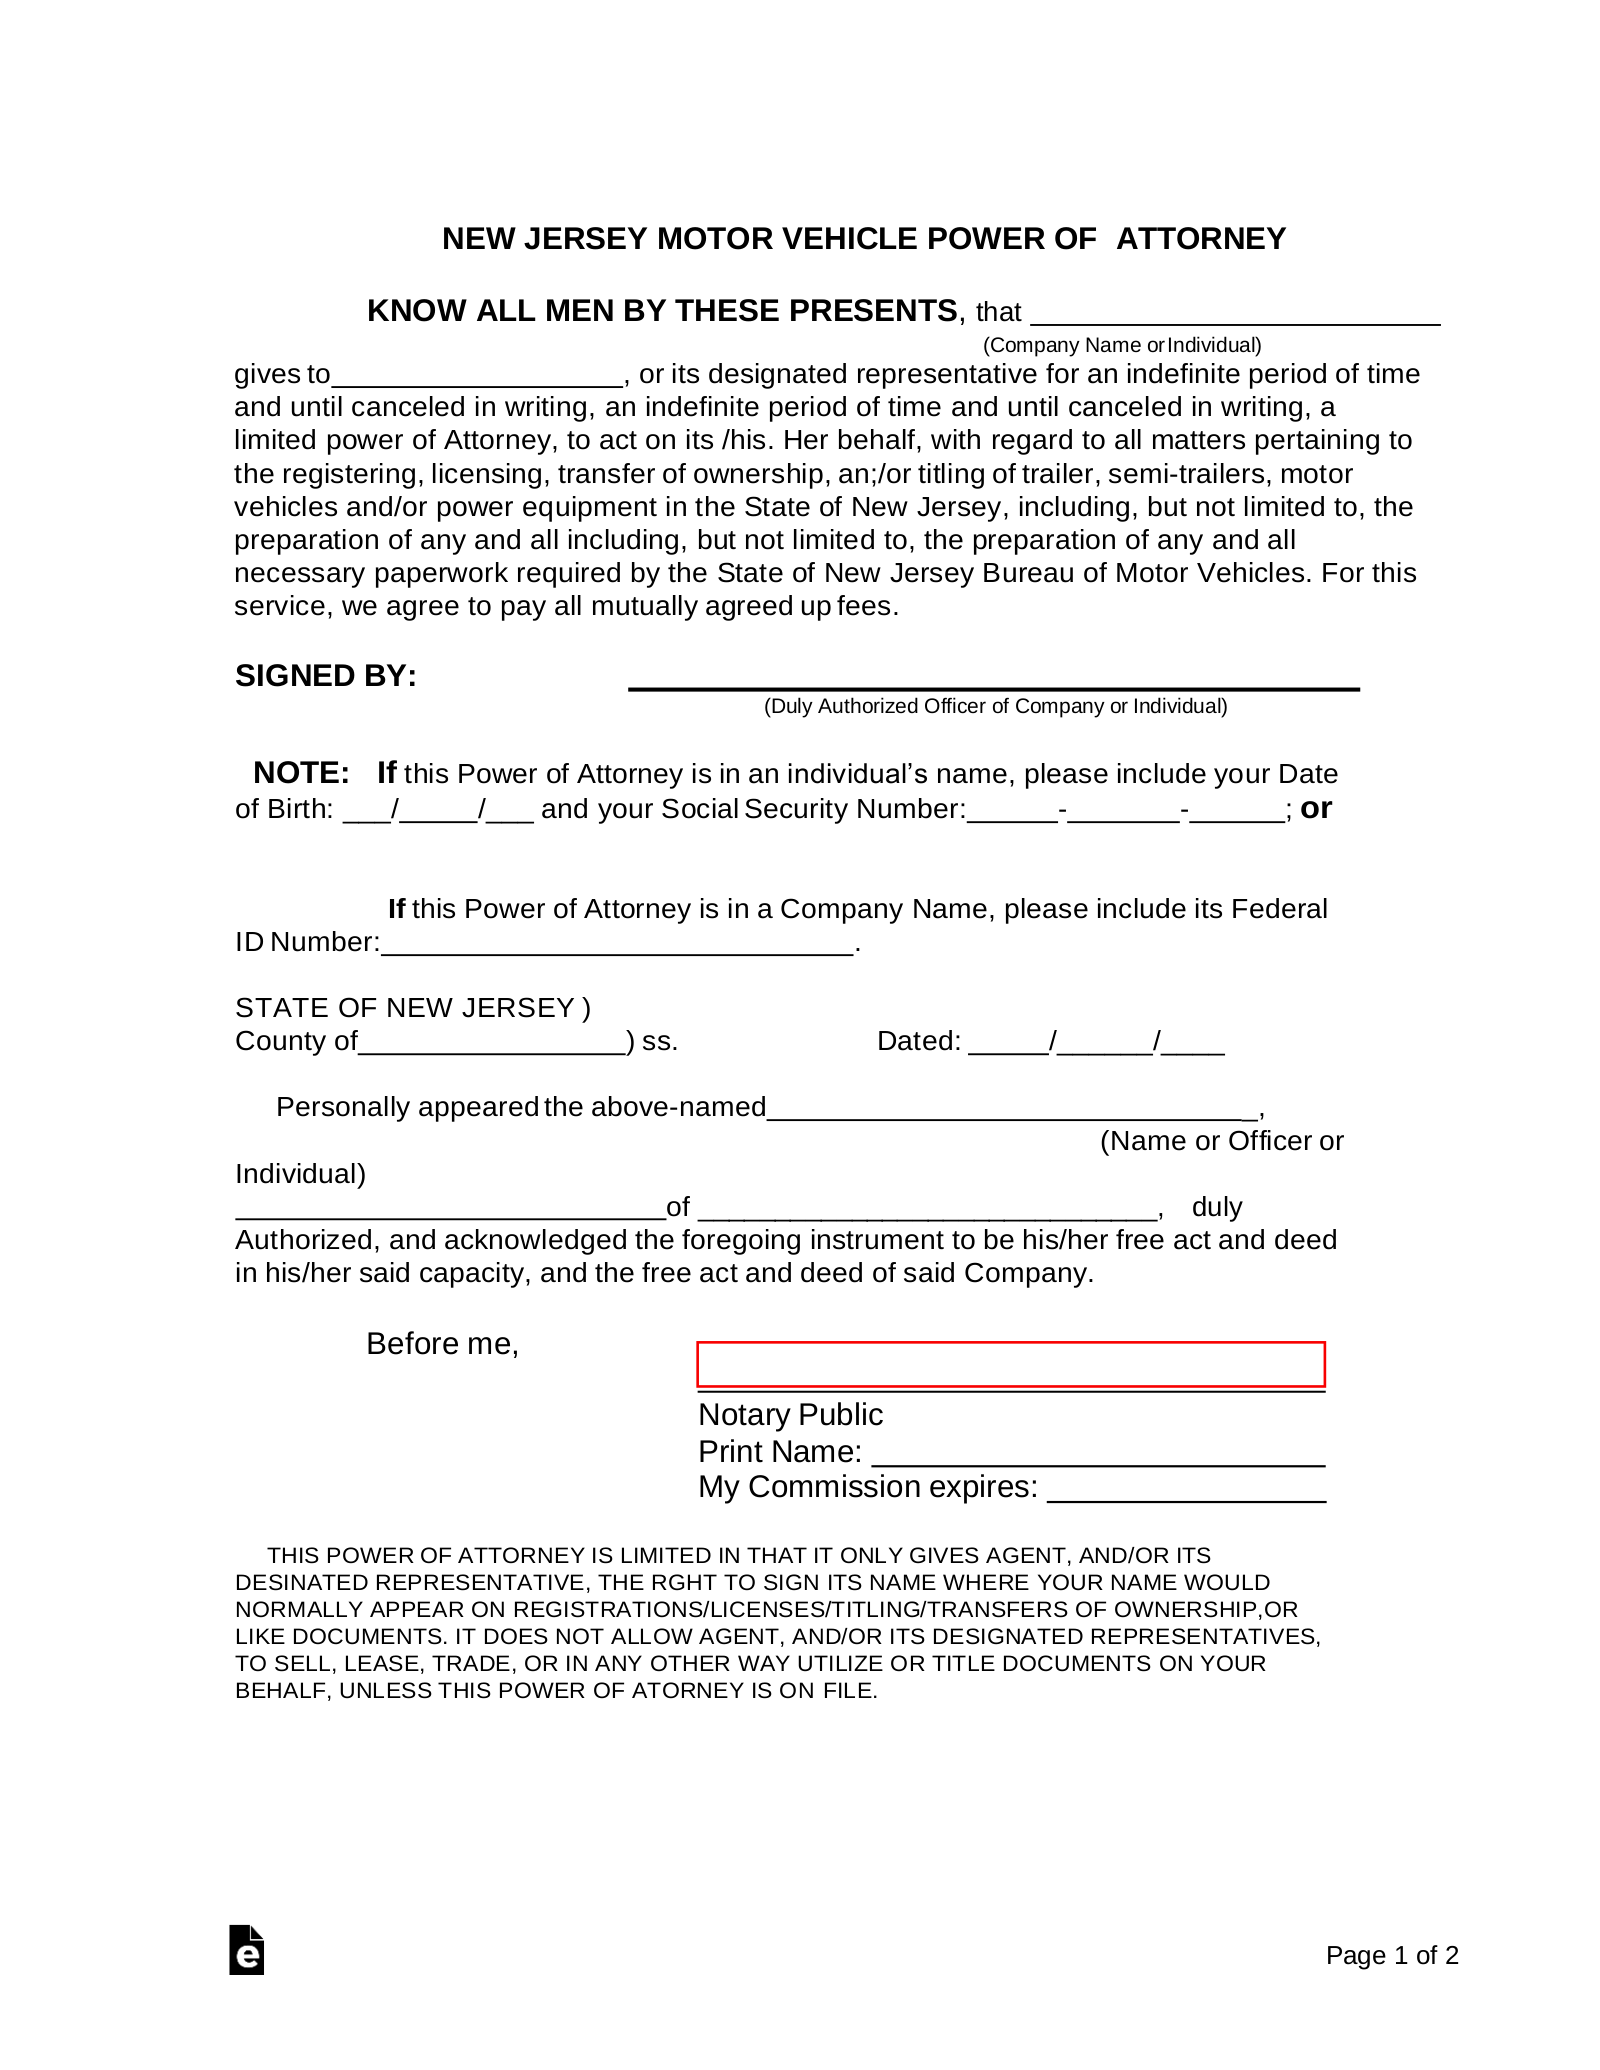 Free New Jersey Motor Vehicle Power of Attorney Form PDF